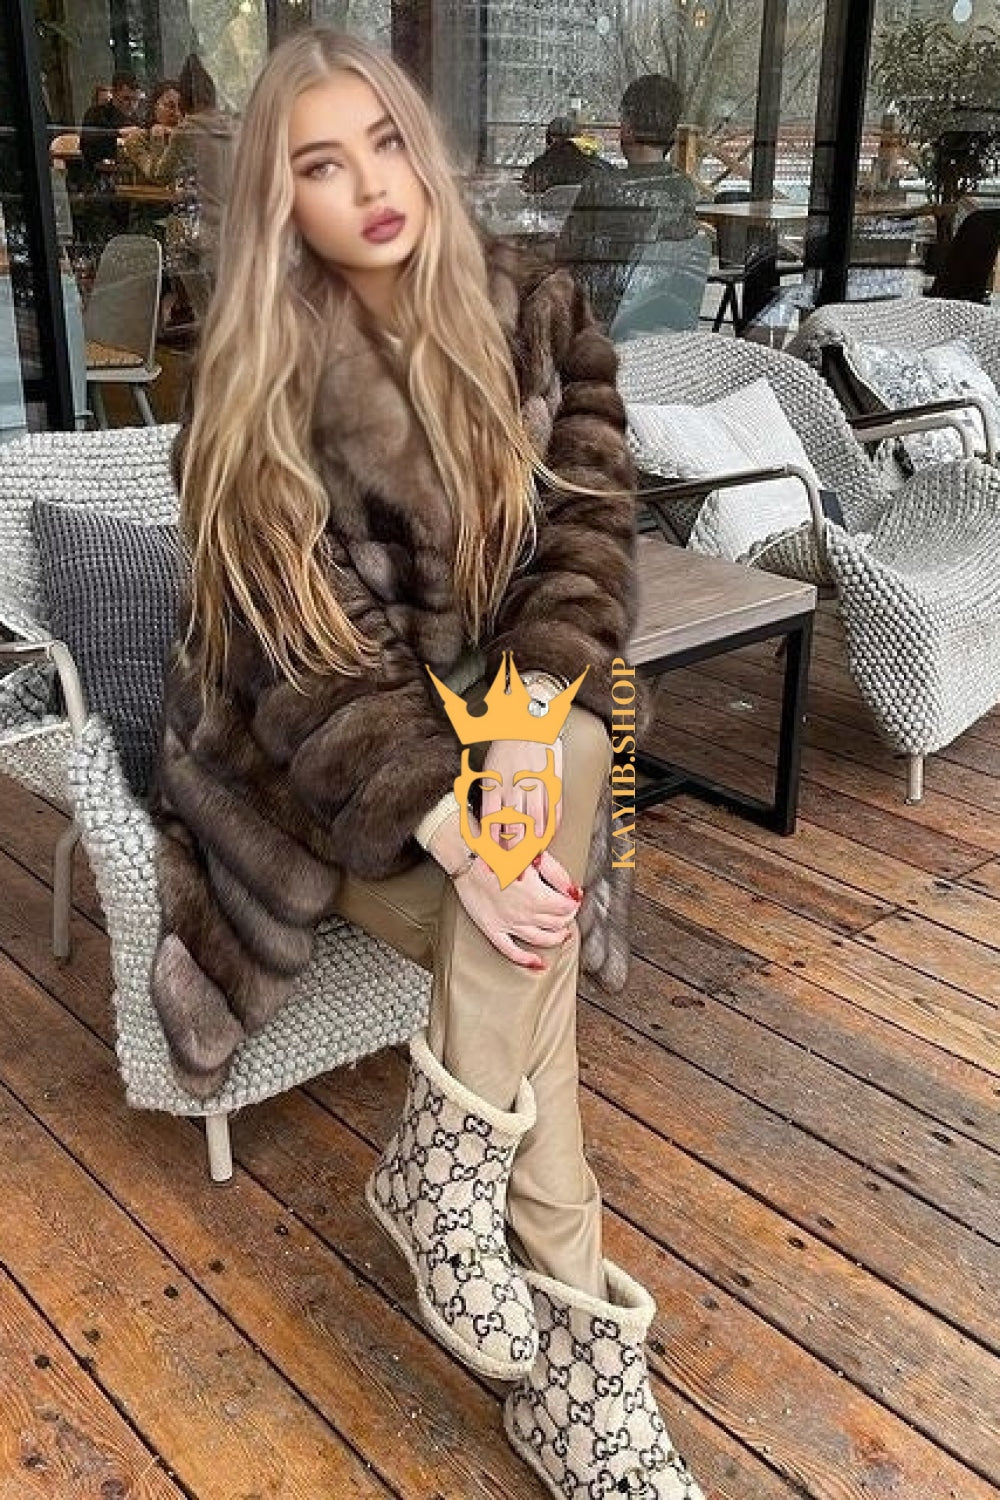 Winter coat- Luxury Tiger-Striped Raccoon Fur Short Coat - Stay Stylish and Warm with Oversized Sleeves - kayibstrore